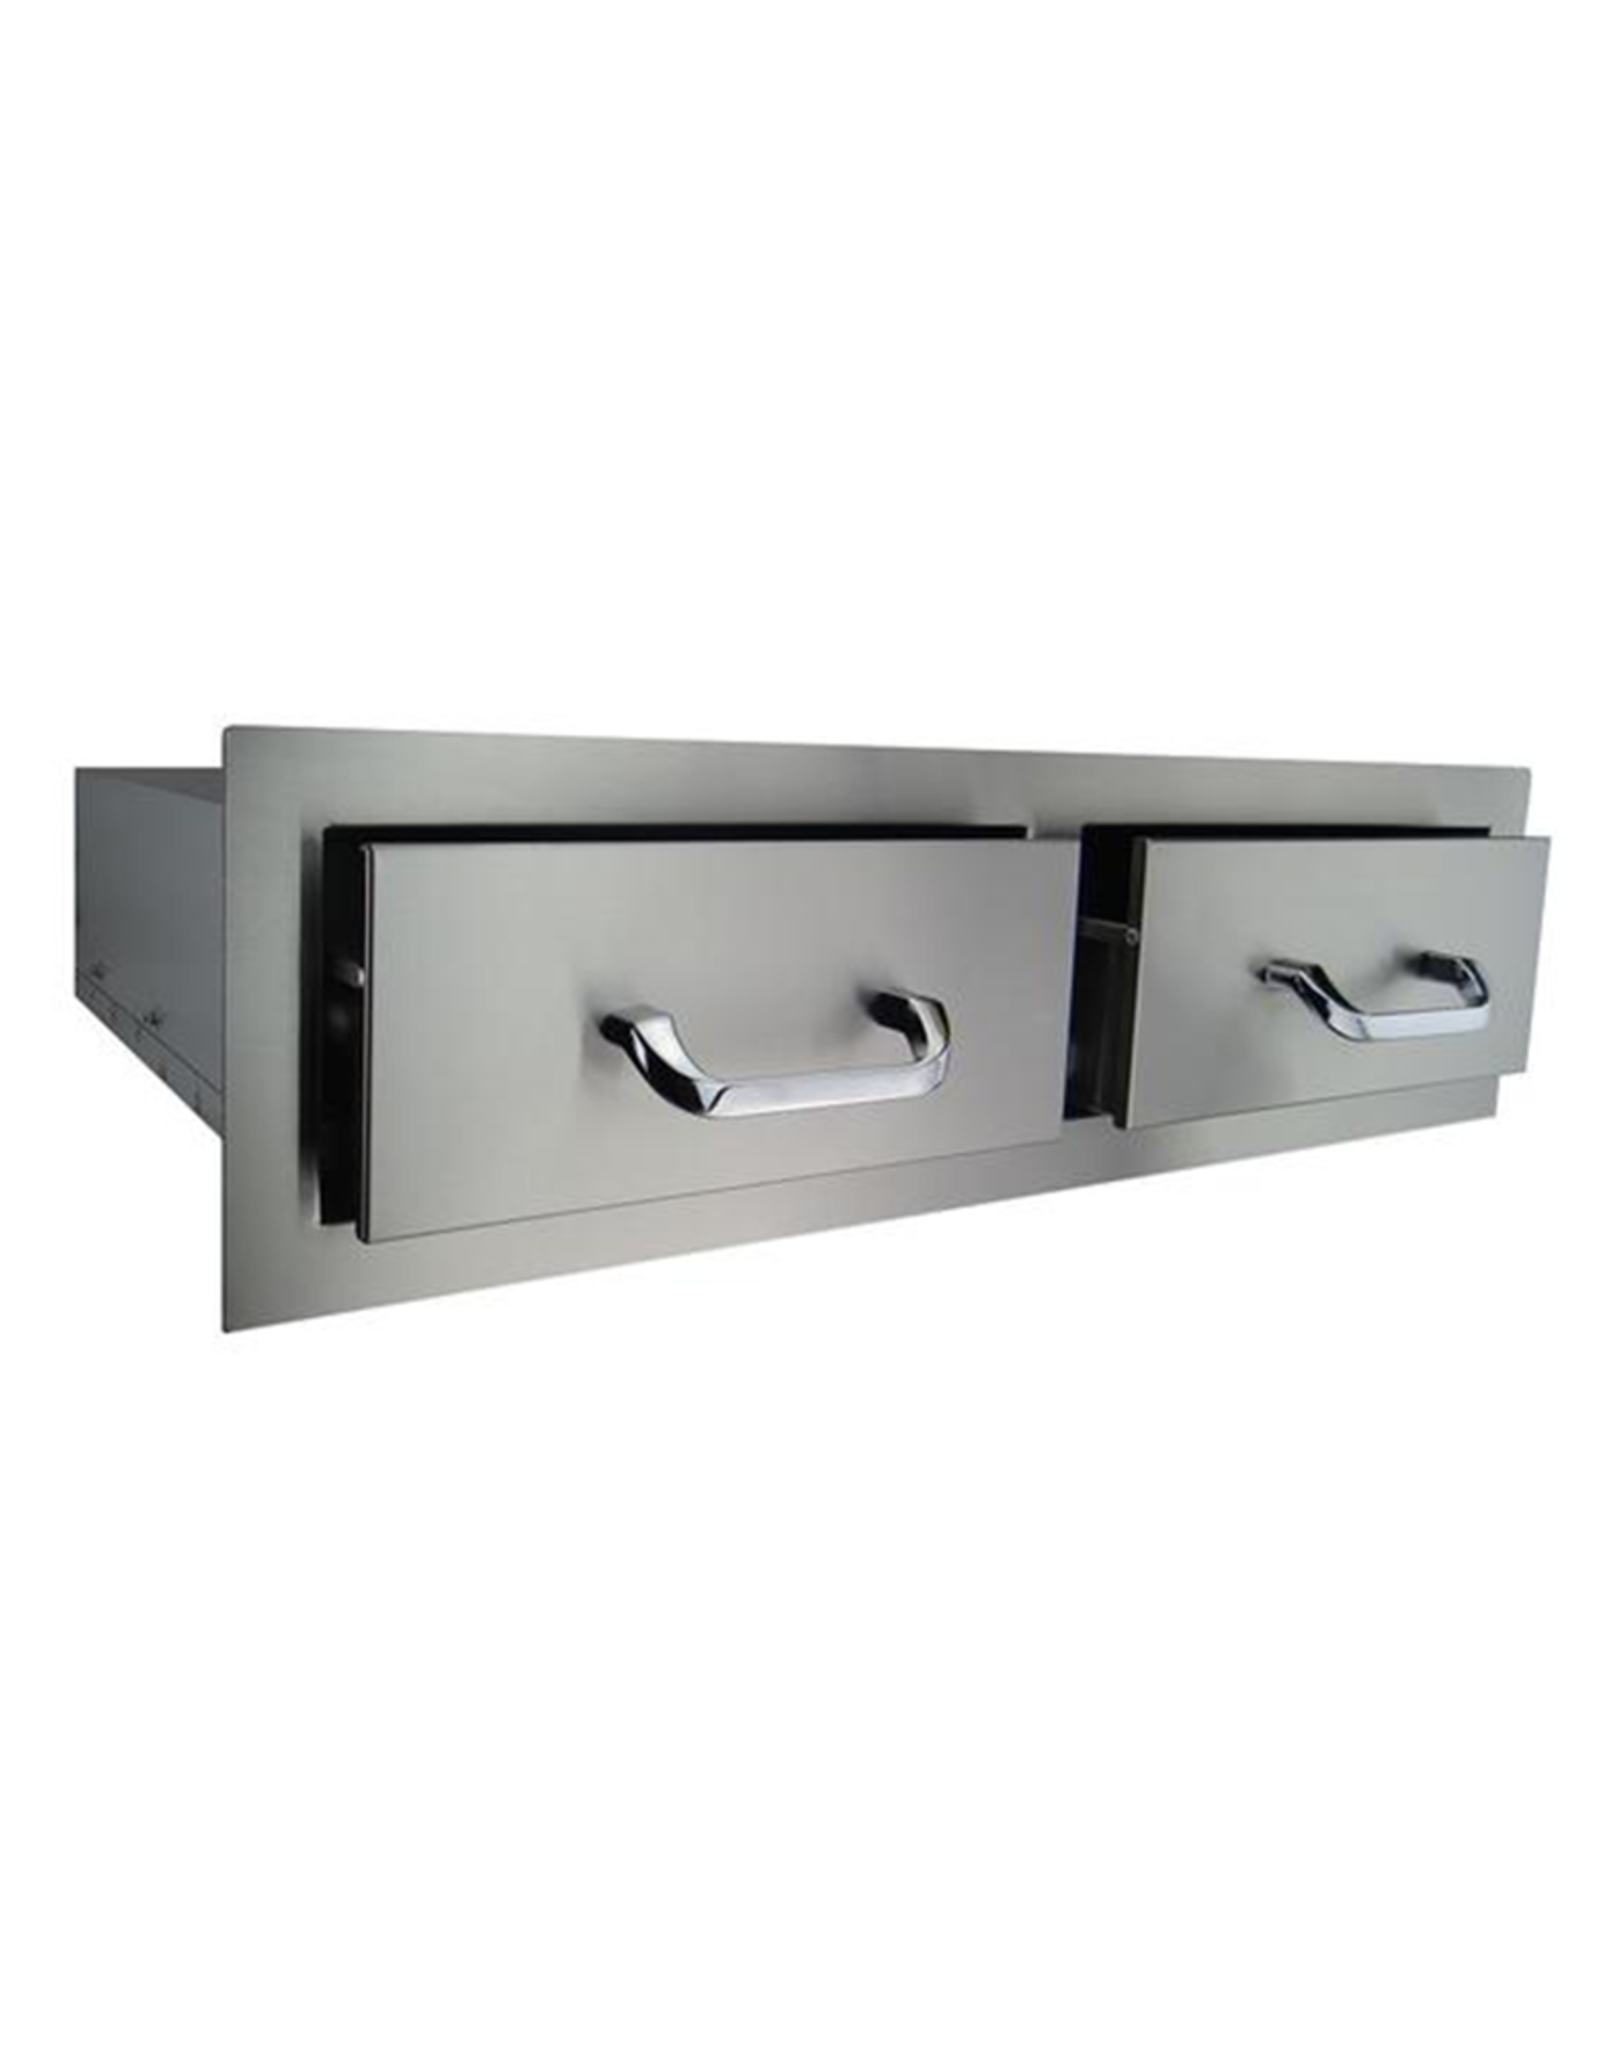 Renaissance Cooking Systems Renaissance Cooking Systems R-Series Horizontal Double Drawer - RHR2